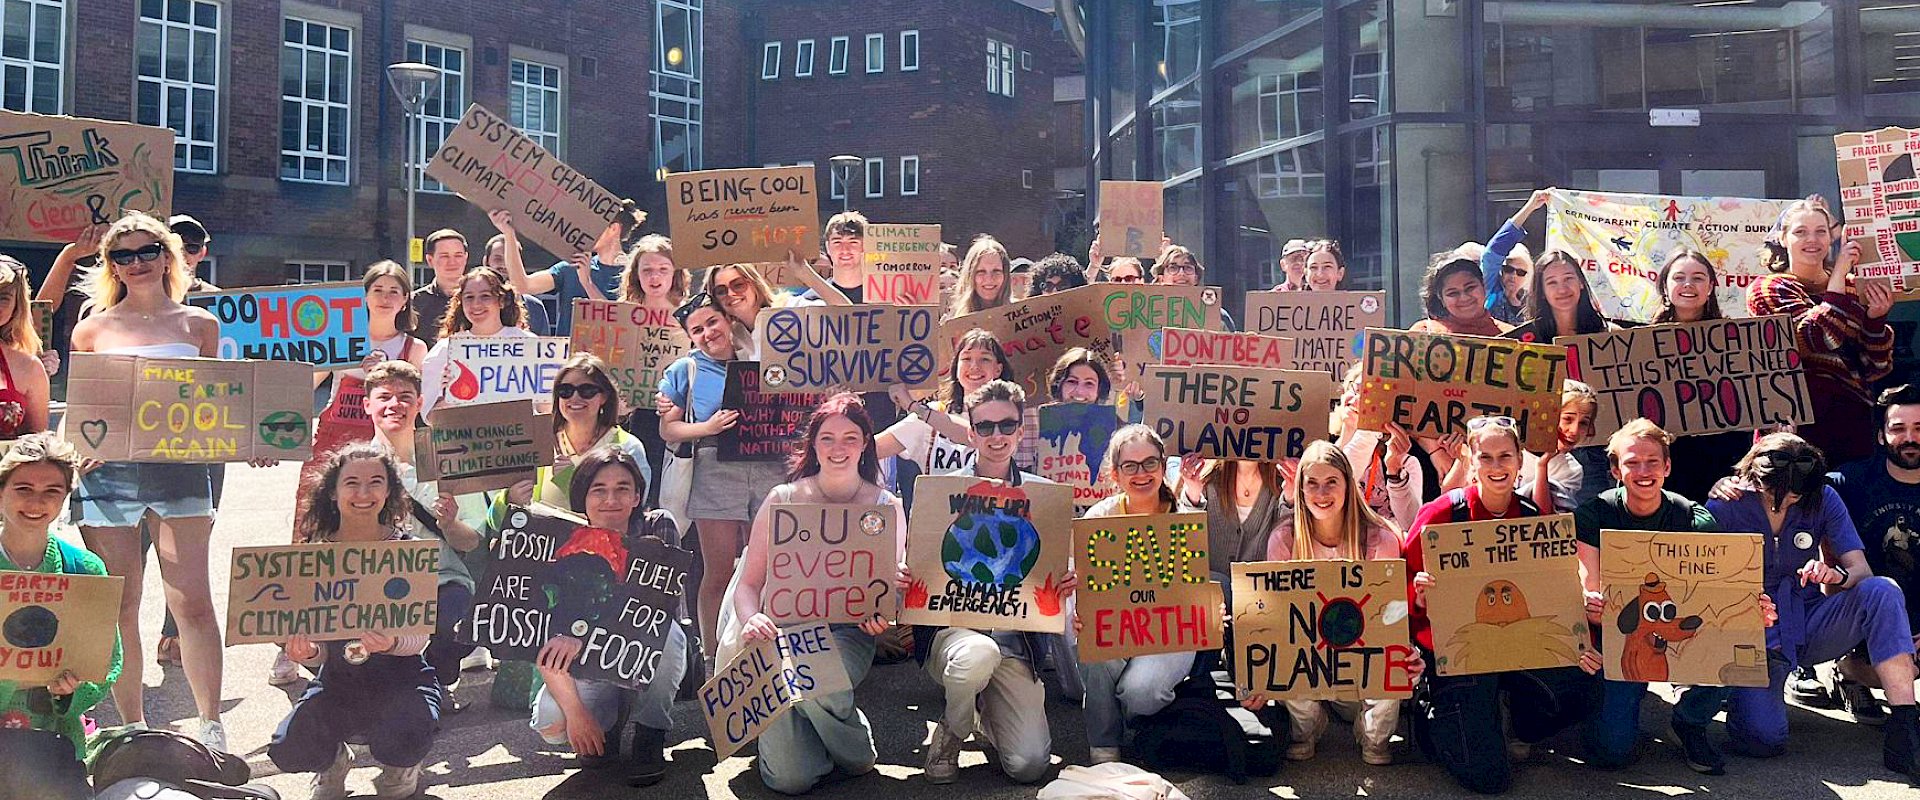 Large group of students holding up placards in the sunshine outdoors. Placards read phrases such as "there is no planet b", and "system change, not climate change"